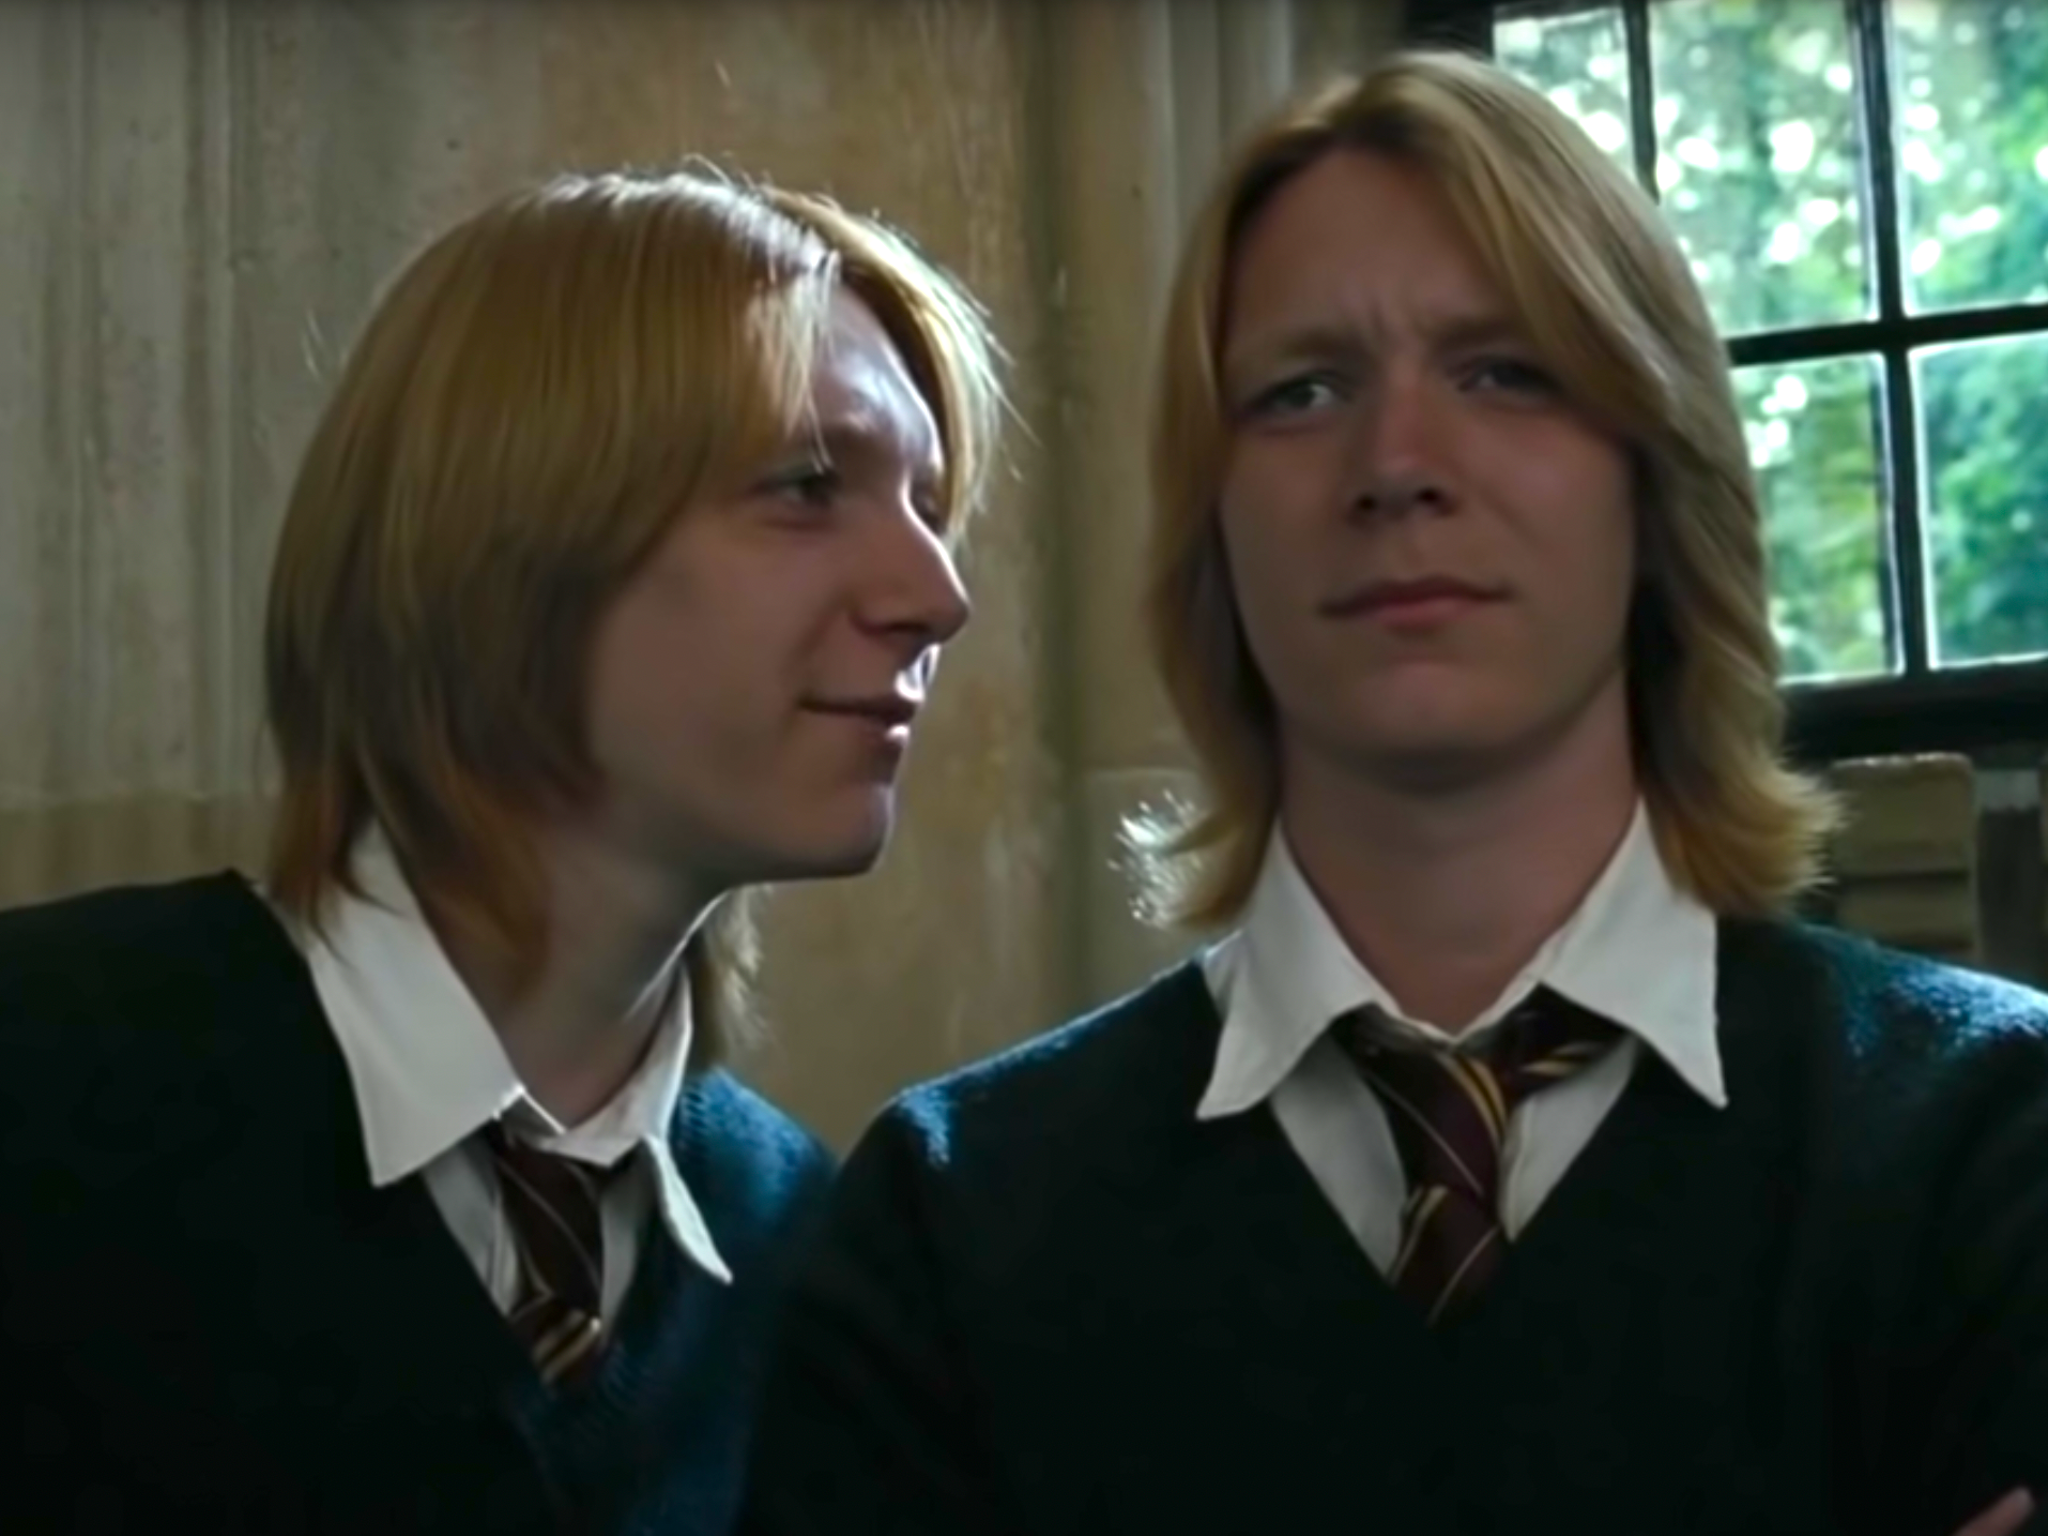 James and Oliver Phelps played Fred and George Weasley across all eight Harry Potter films